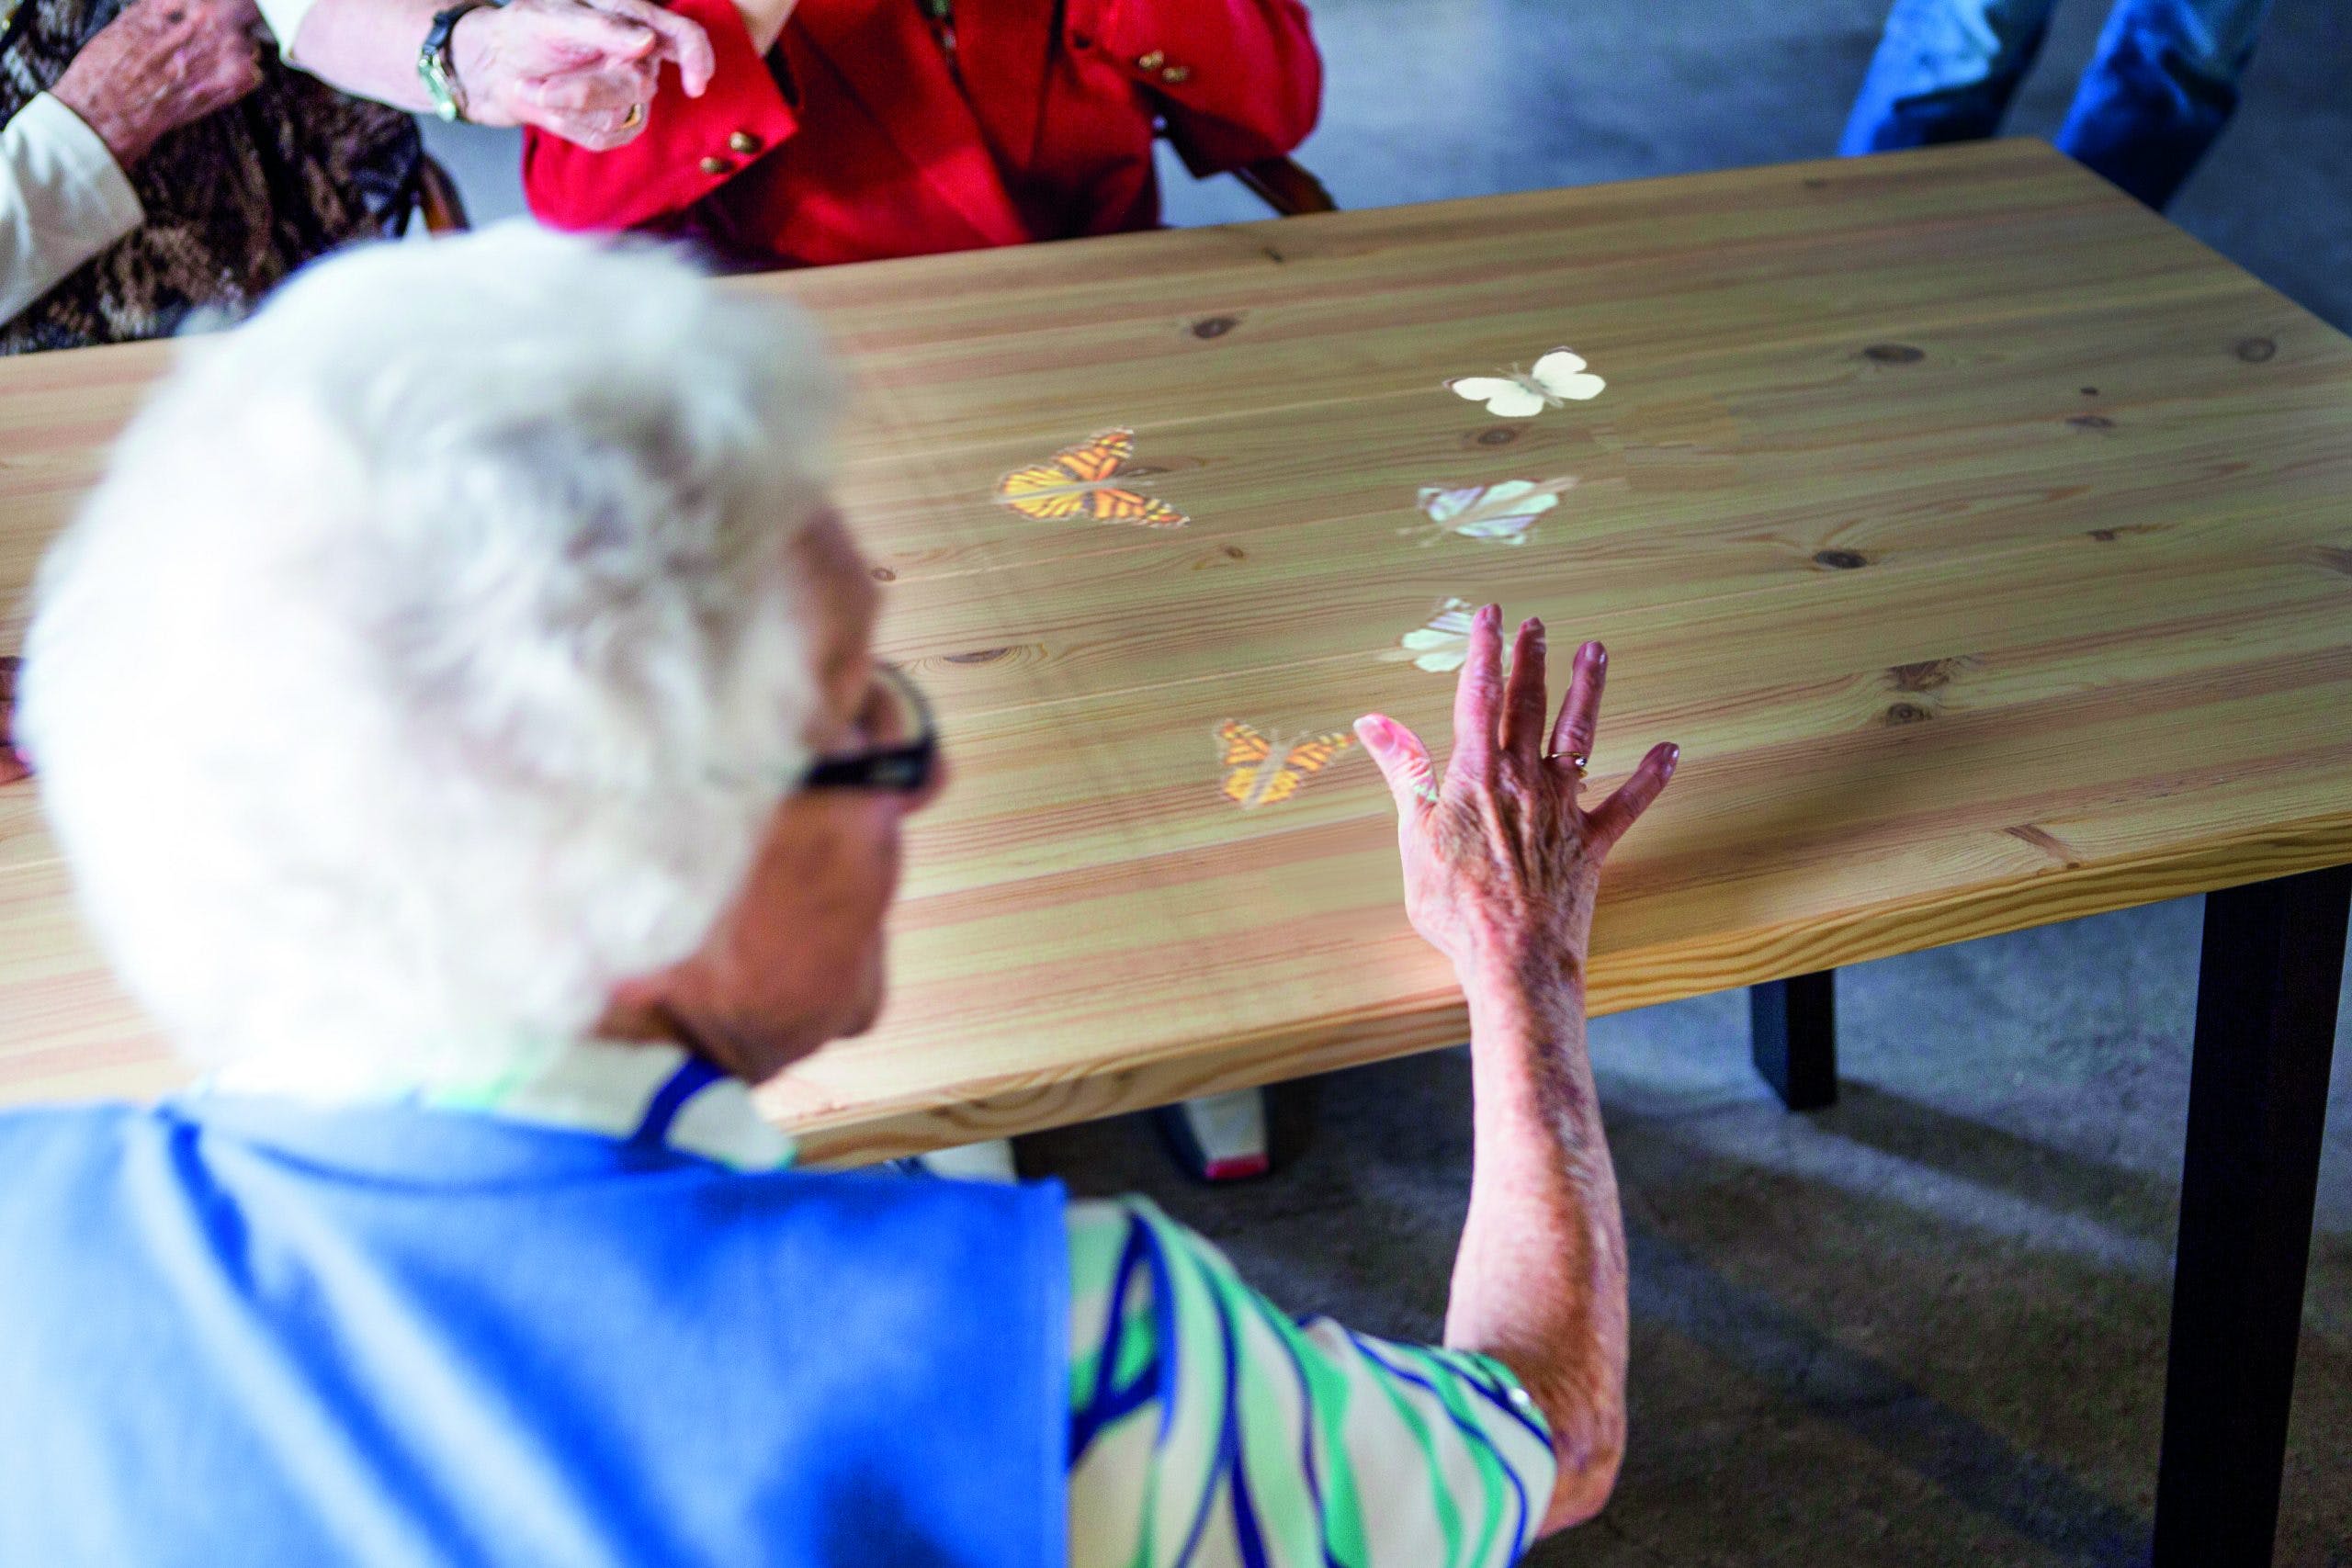 A picture of elderly people interacting with Tovertafel. Images of butterflies are projected onto a table.